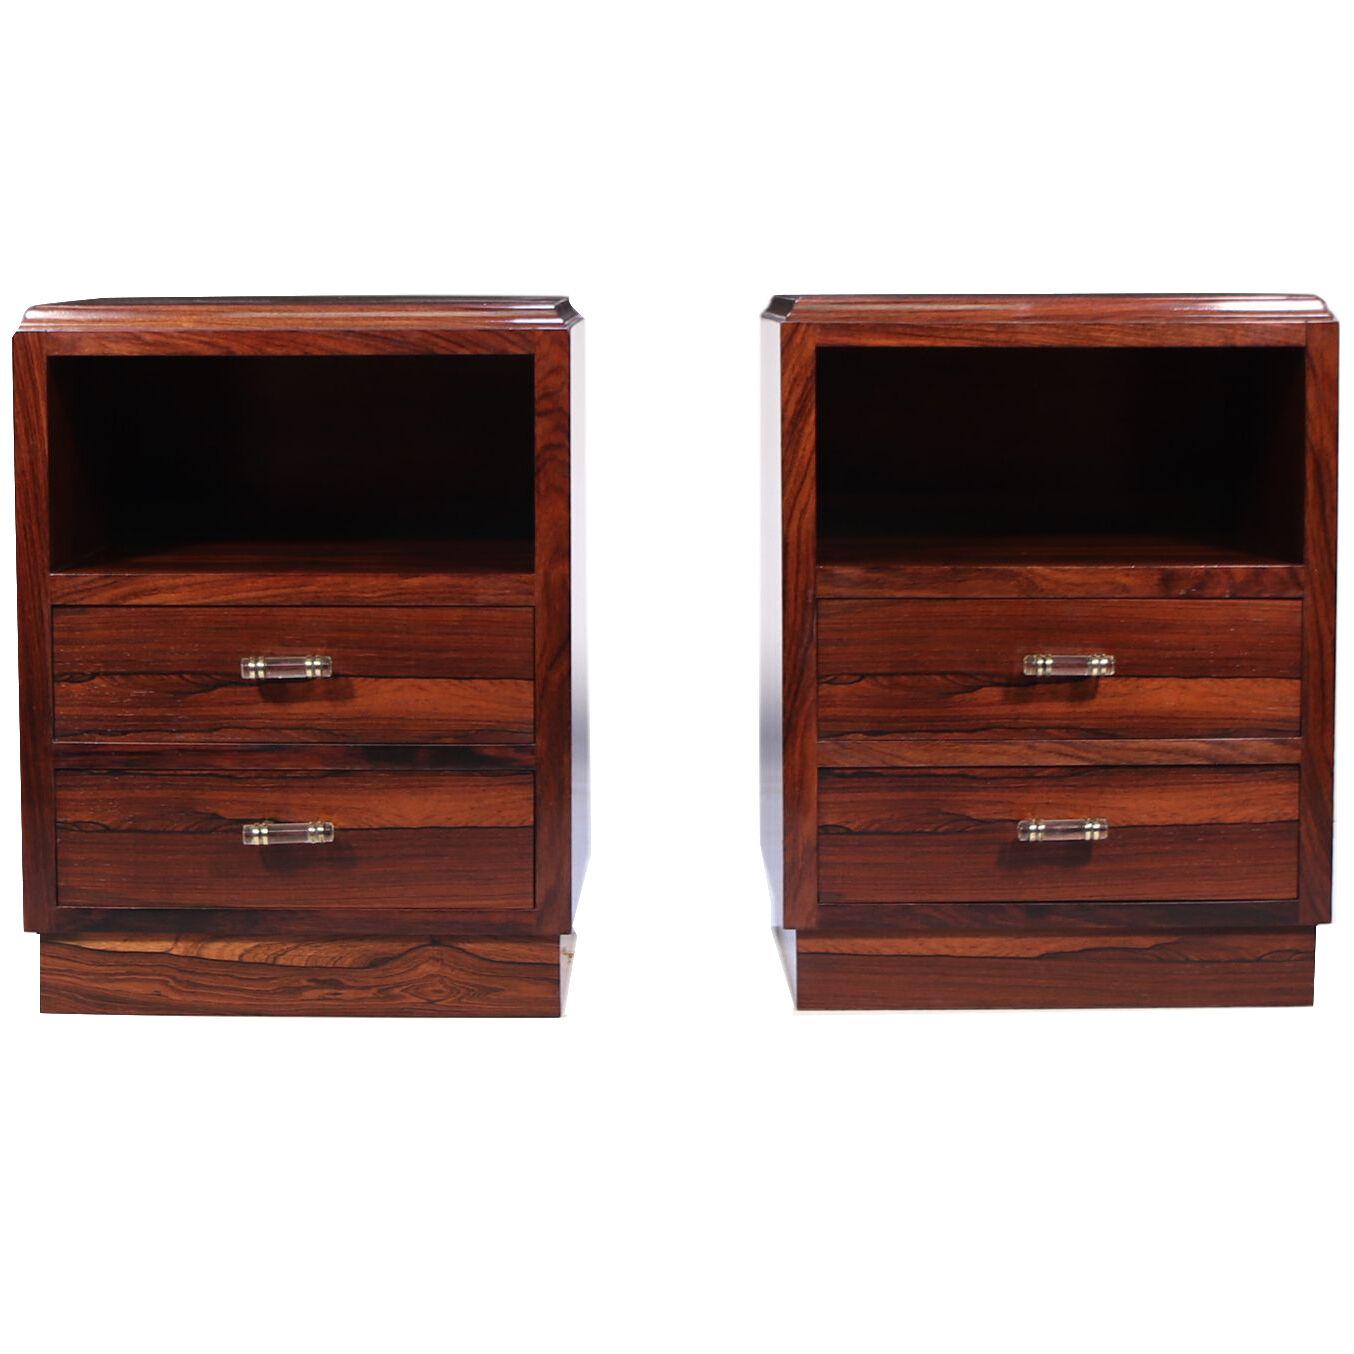 A Pair of French art Deco Bedside Chests 1925